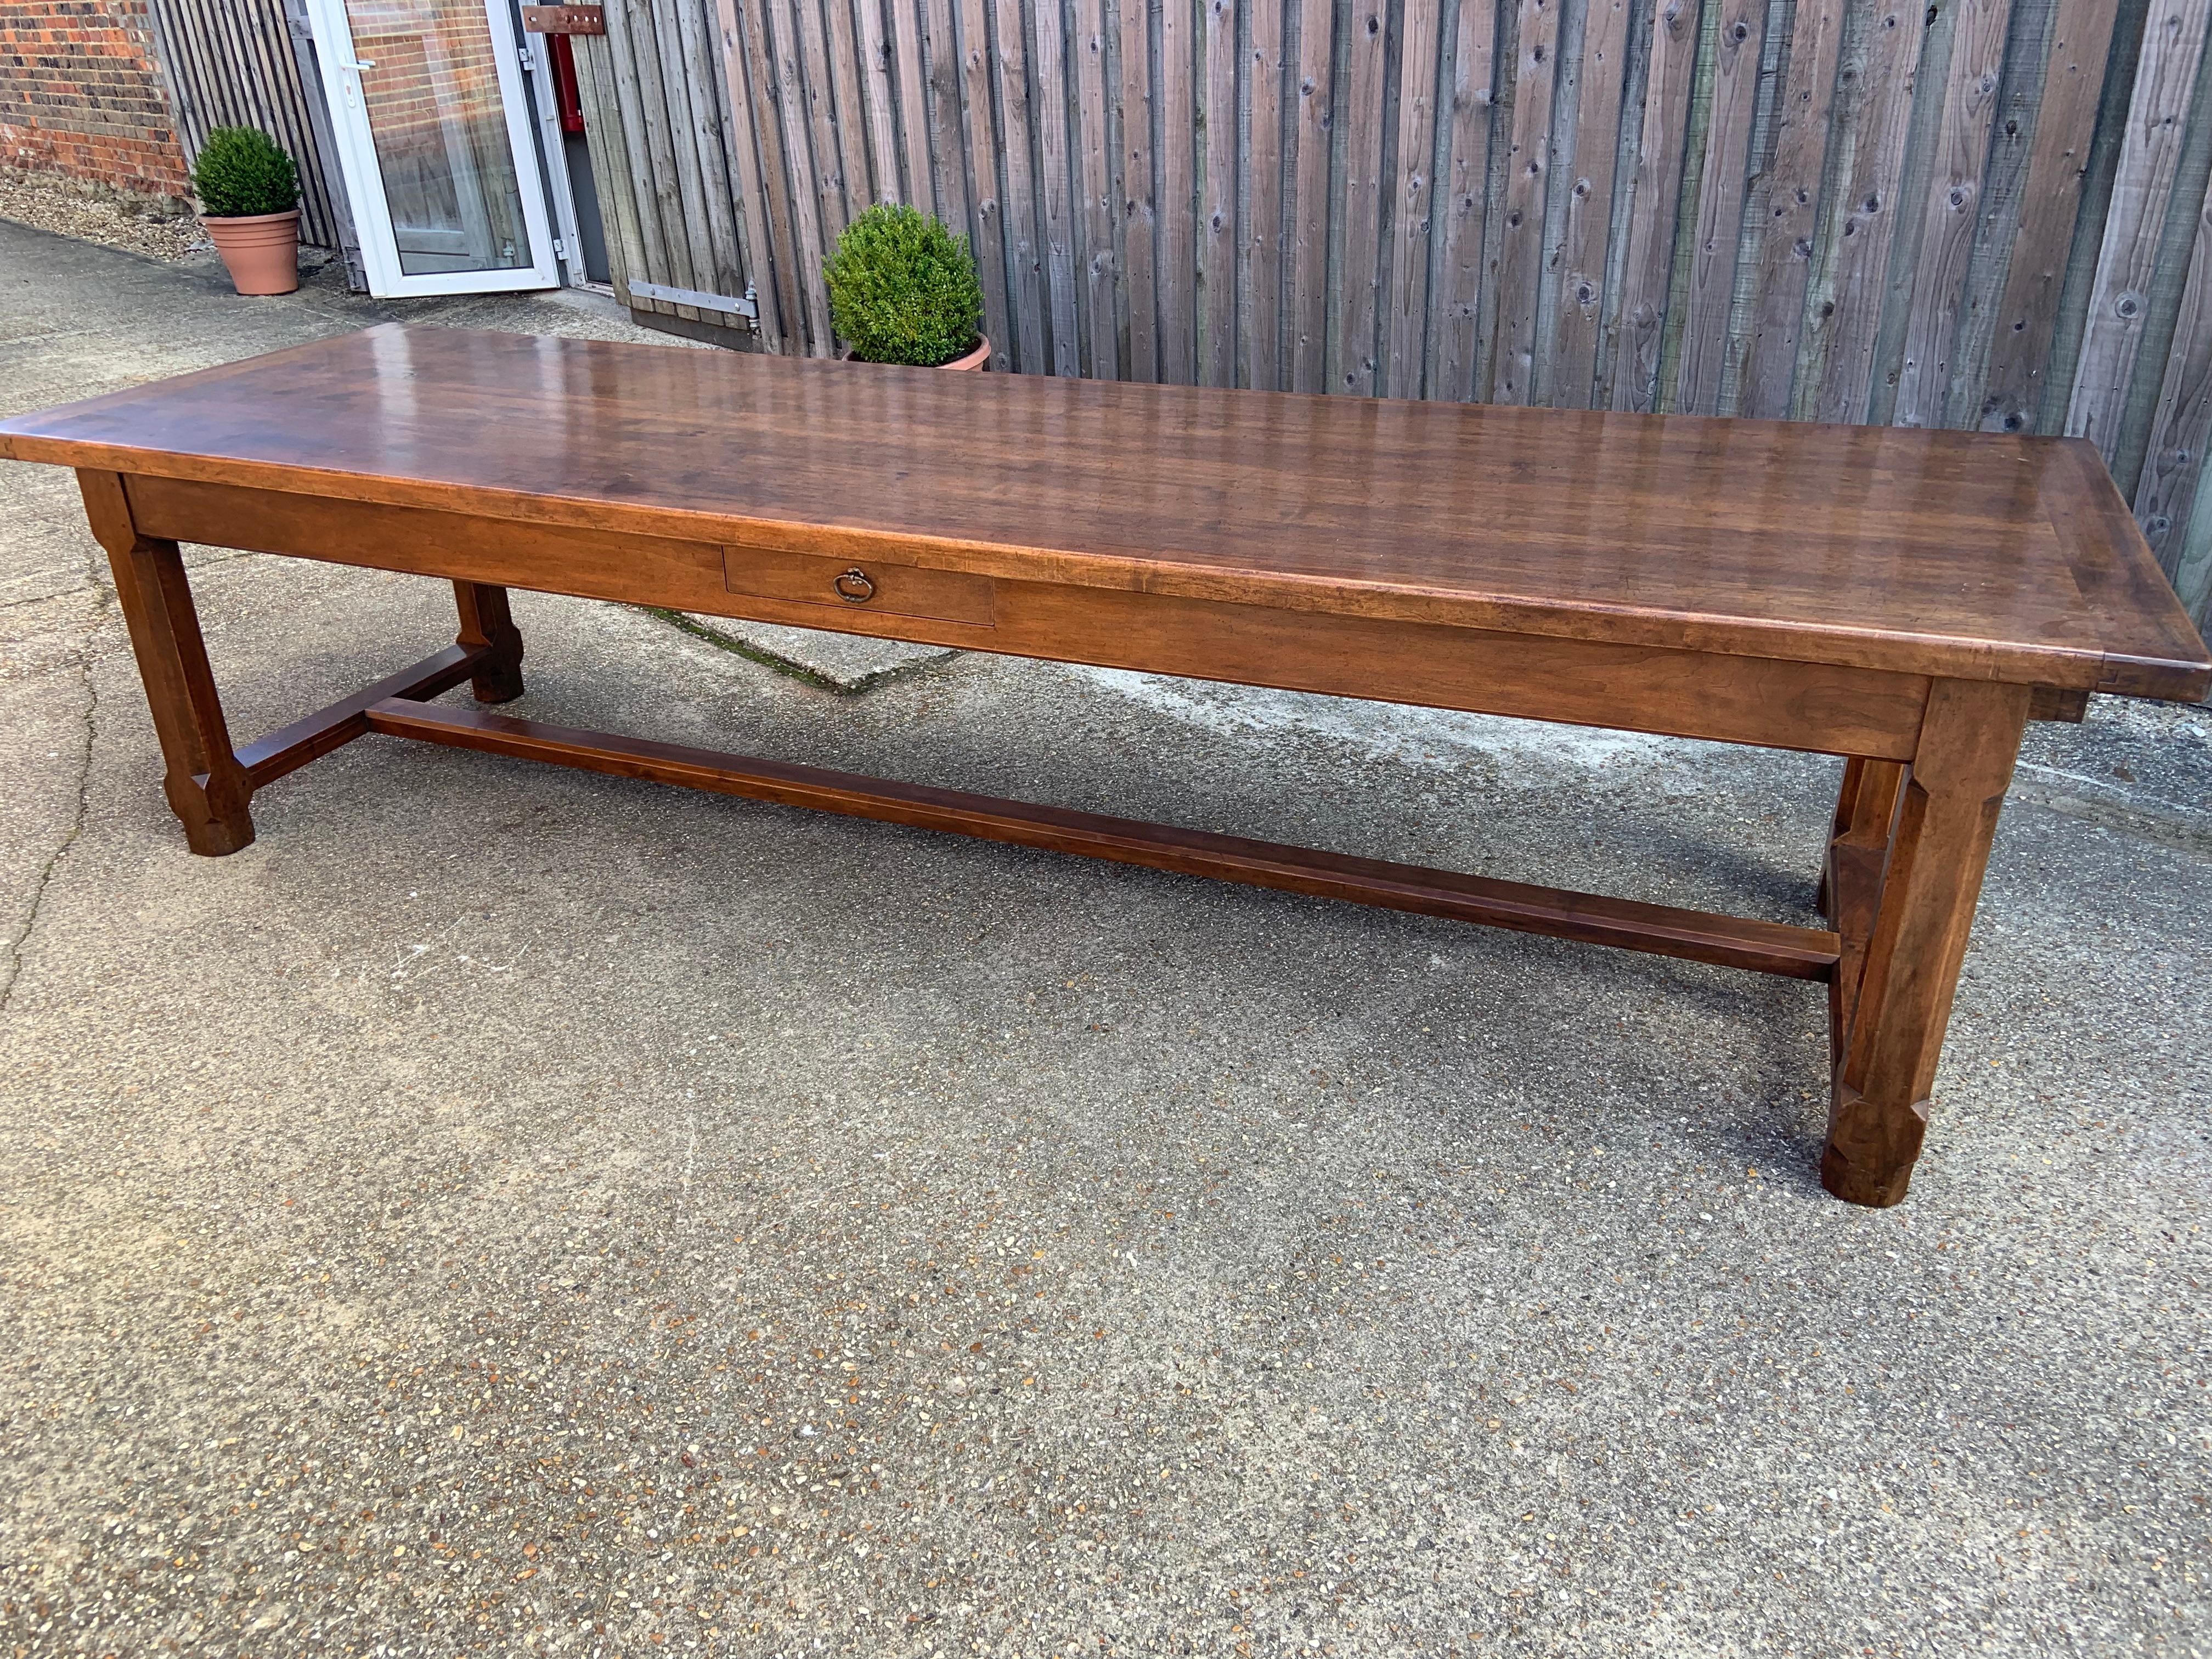 Large Antique solid walnut farmhouse table with gorgeous colour and patination. The top has cleated ends and stands on a solid Walnut base with square chamfered legs united by a centre stretcher. The legs are very thick and sturdy again making this